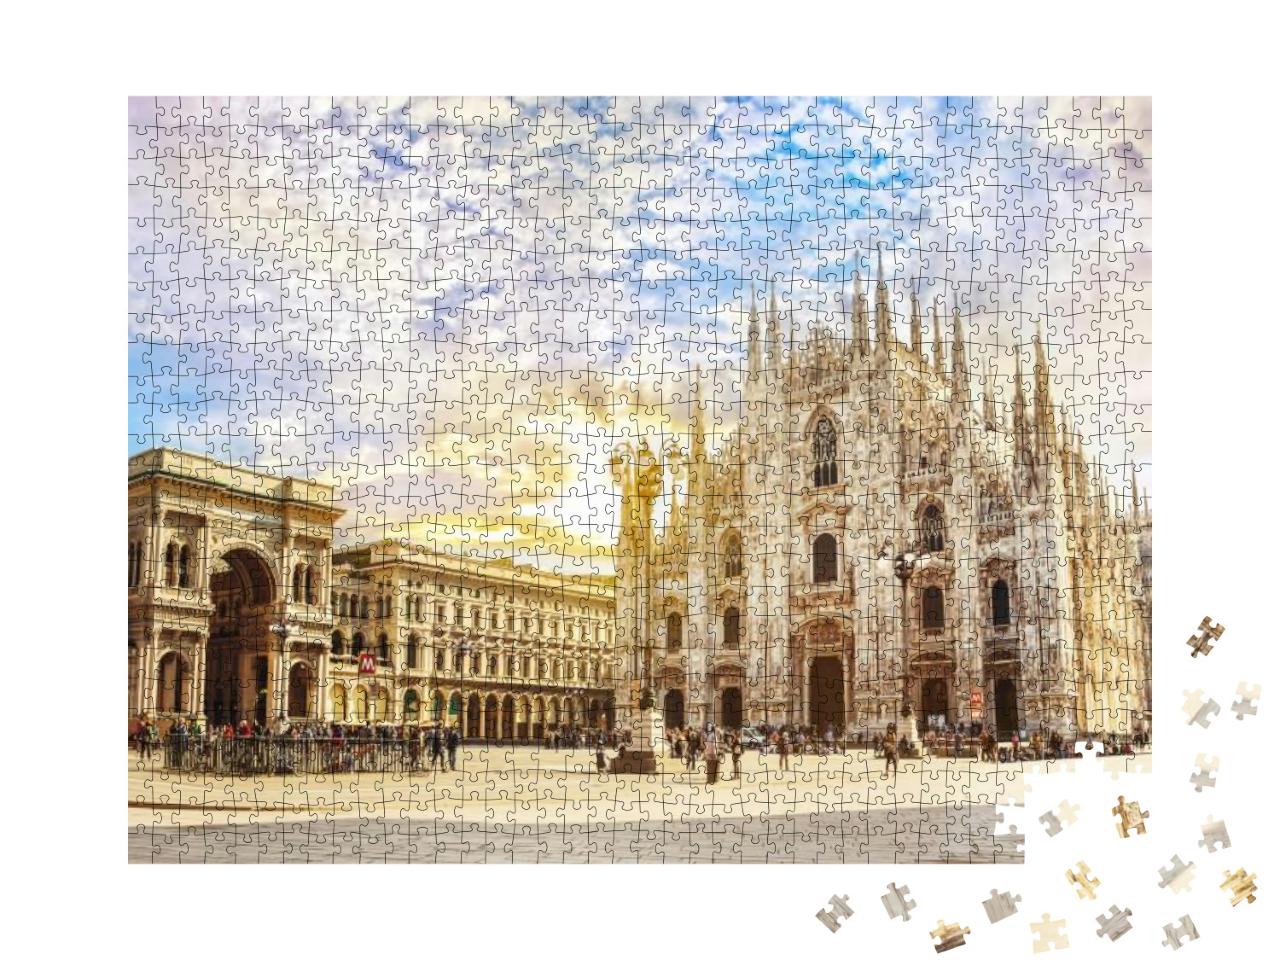 Cathedral Duomo Di Milano & Vittorio Emanuele Gallery in... Jigsaw Puzzle with 1000 pieces